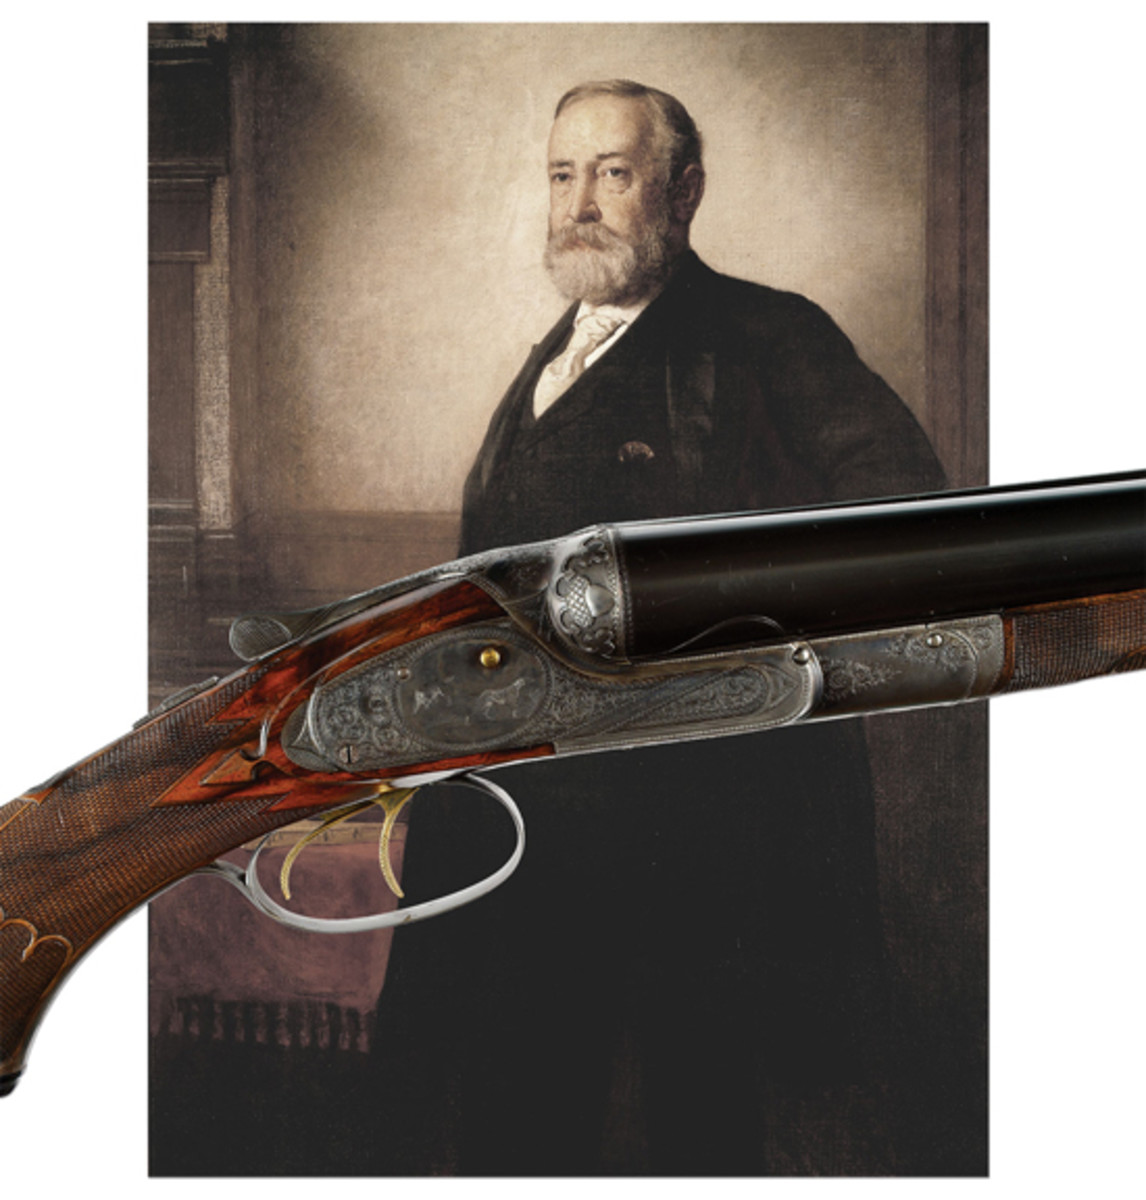 Lot 2429 Presidential Lefever "Optimus" quality shotgun, presented to Benjamin Harrison for his "Protection to American Industry"; probably the finest and most important nineteenth-century American shotgun. Paul Tudor Jones II Collection. (Extraordinary Session, March 15th)